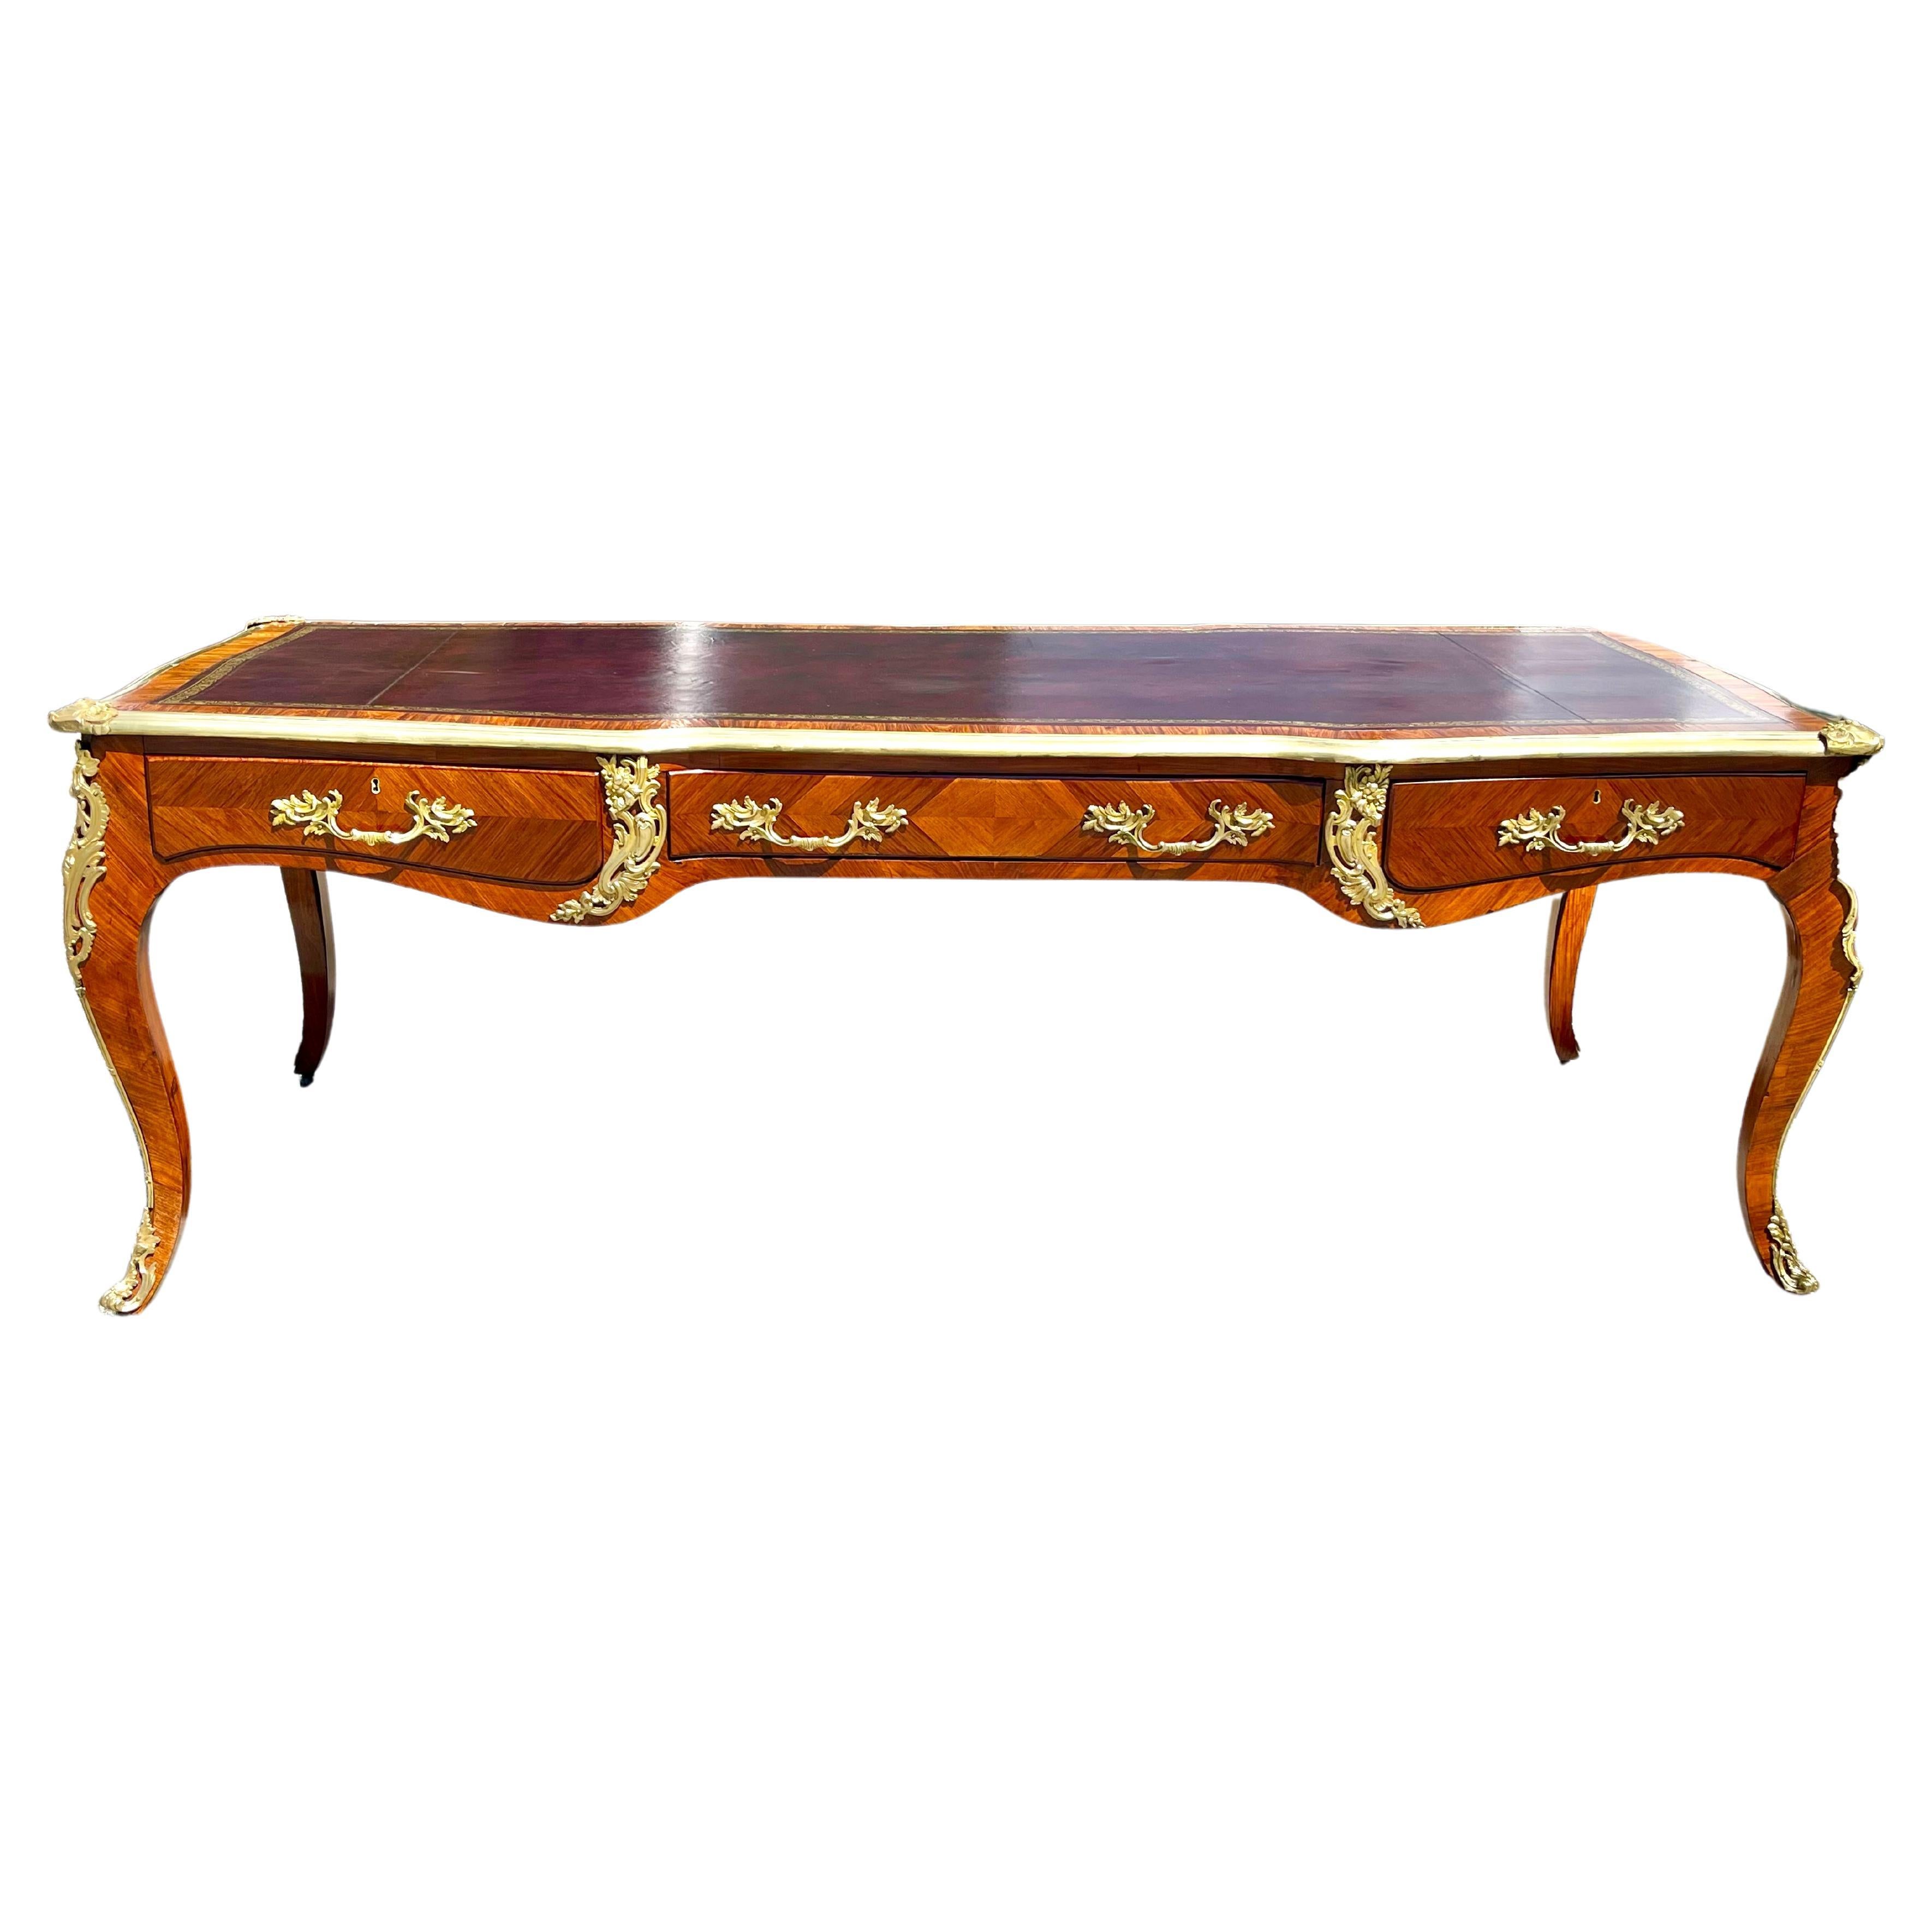 19th century French kingwood Bureau plat writing desk. Beautiful Louis XV Form. Lacquered Bronze Mounts are original. Grand proportion. Embossed Plum leather.

